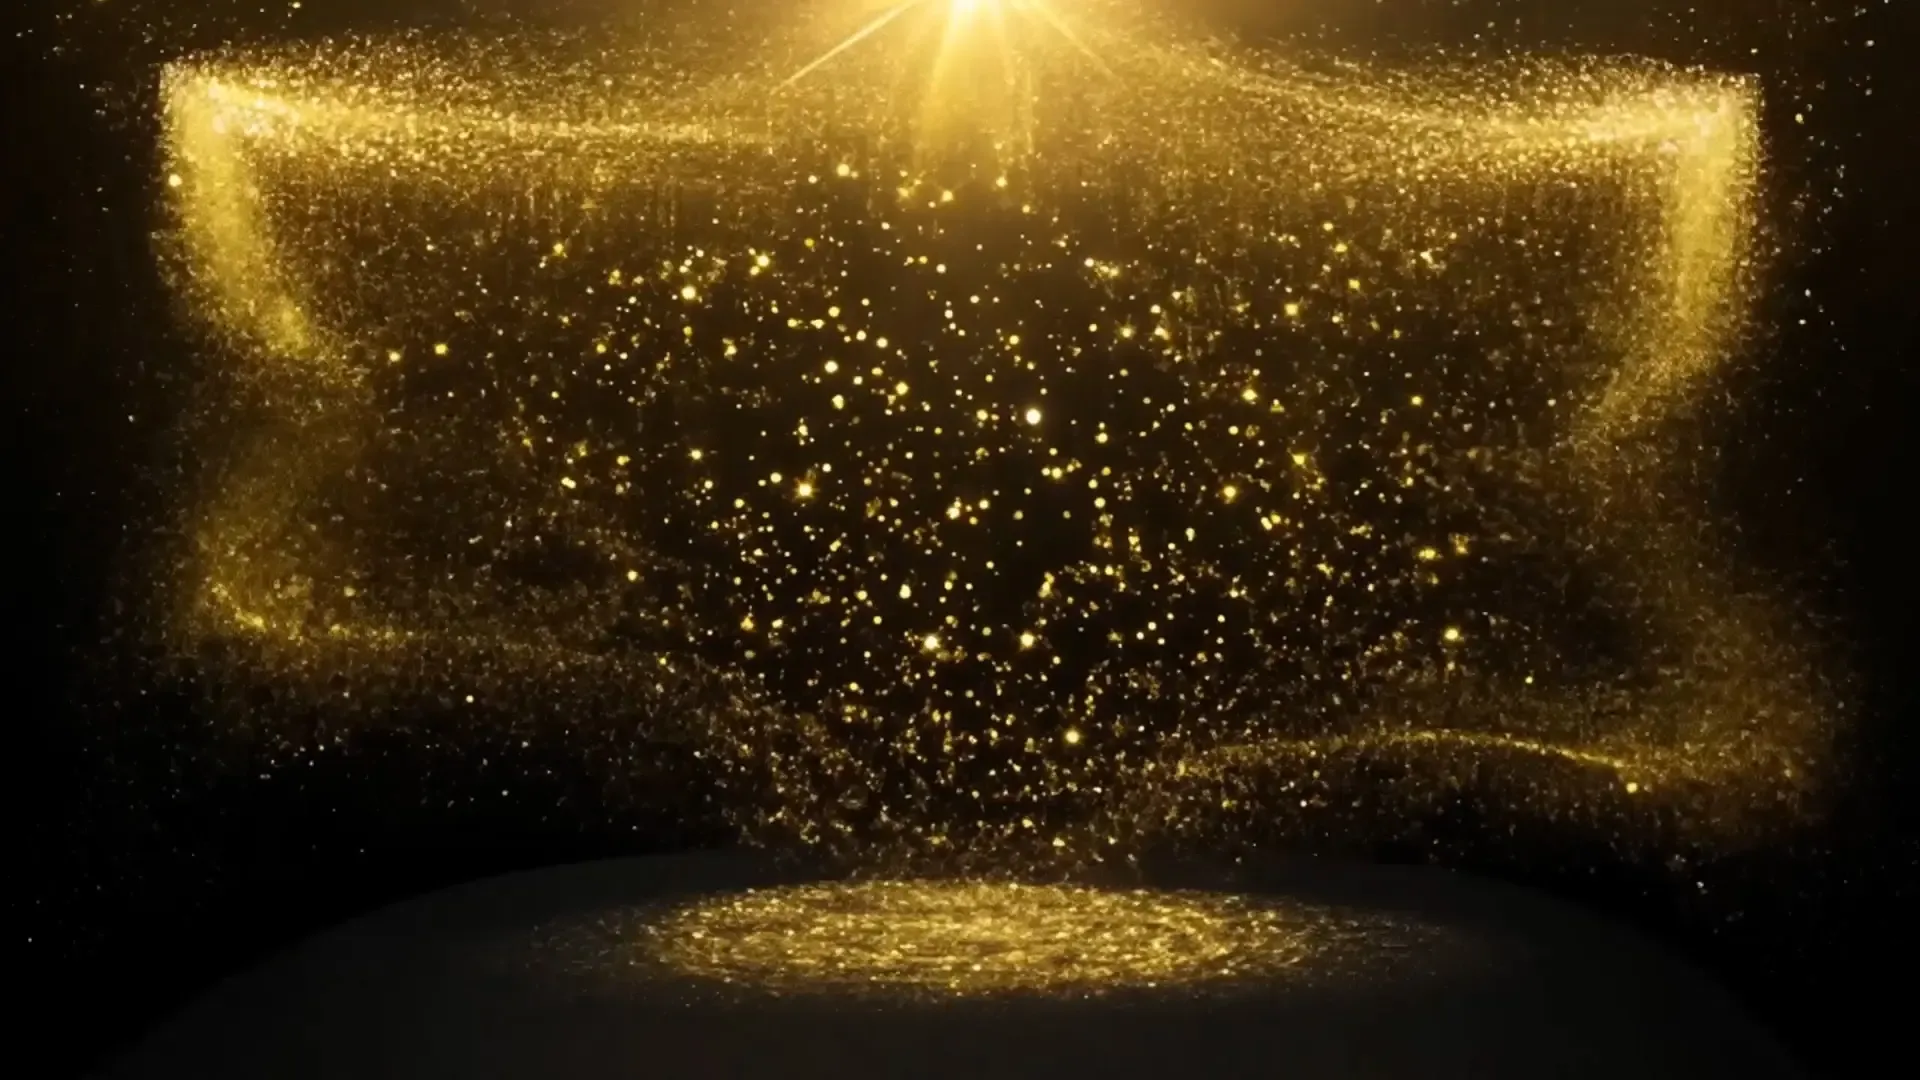 Sparkling Gold Particle Overlay Visual for Special Events